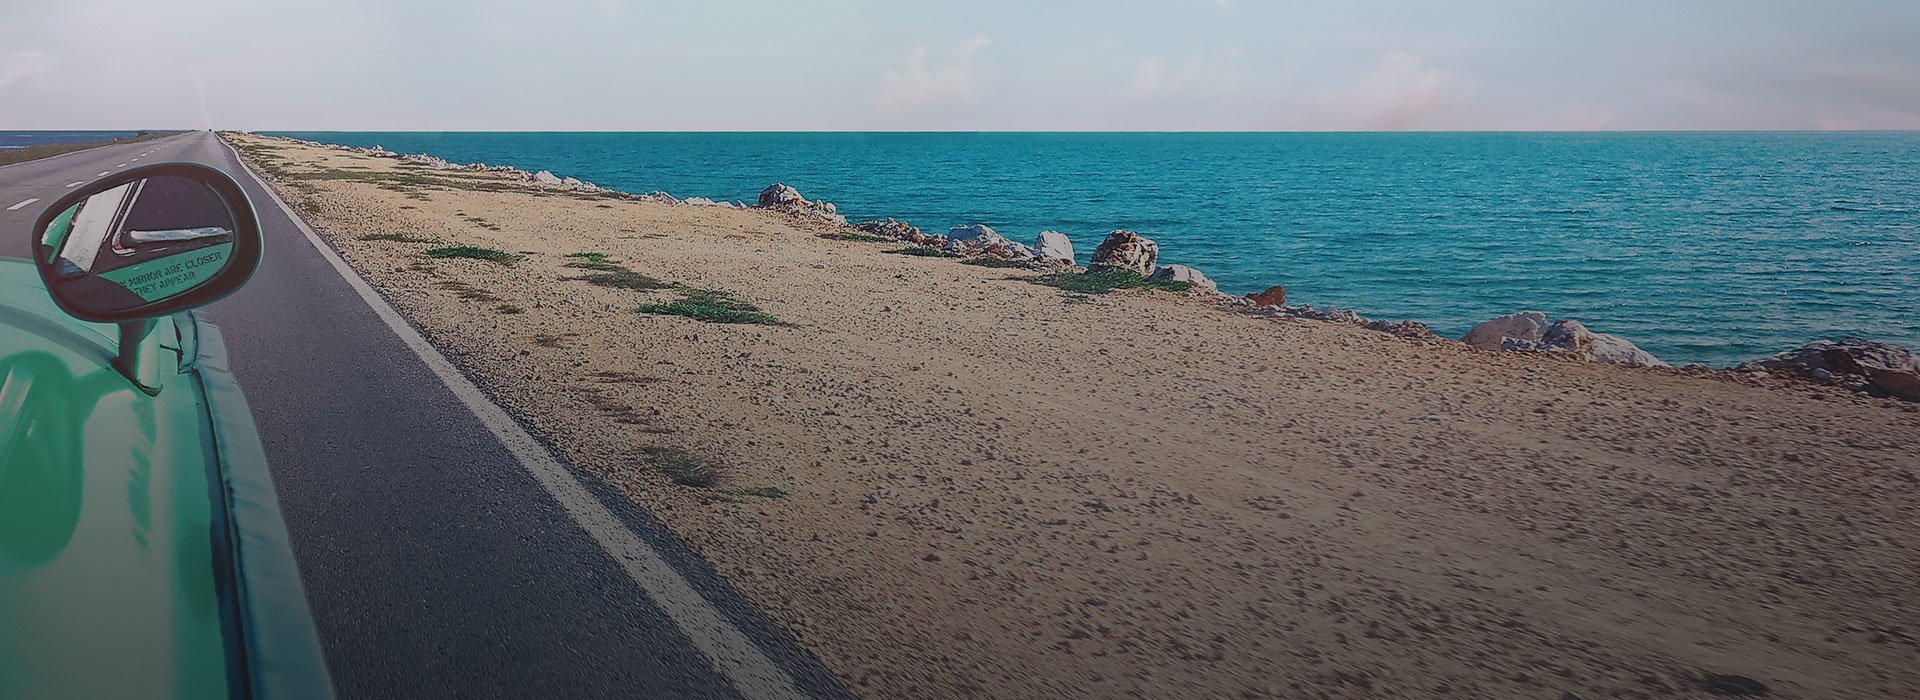 A car on a road with sea on the background